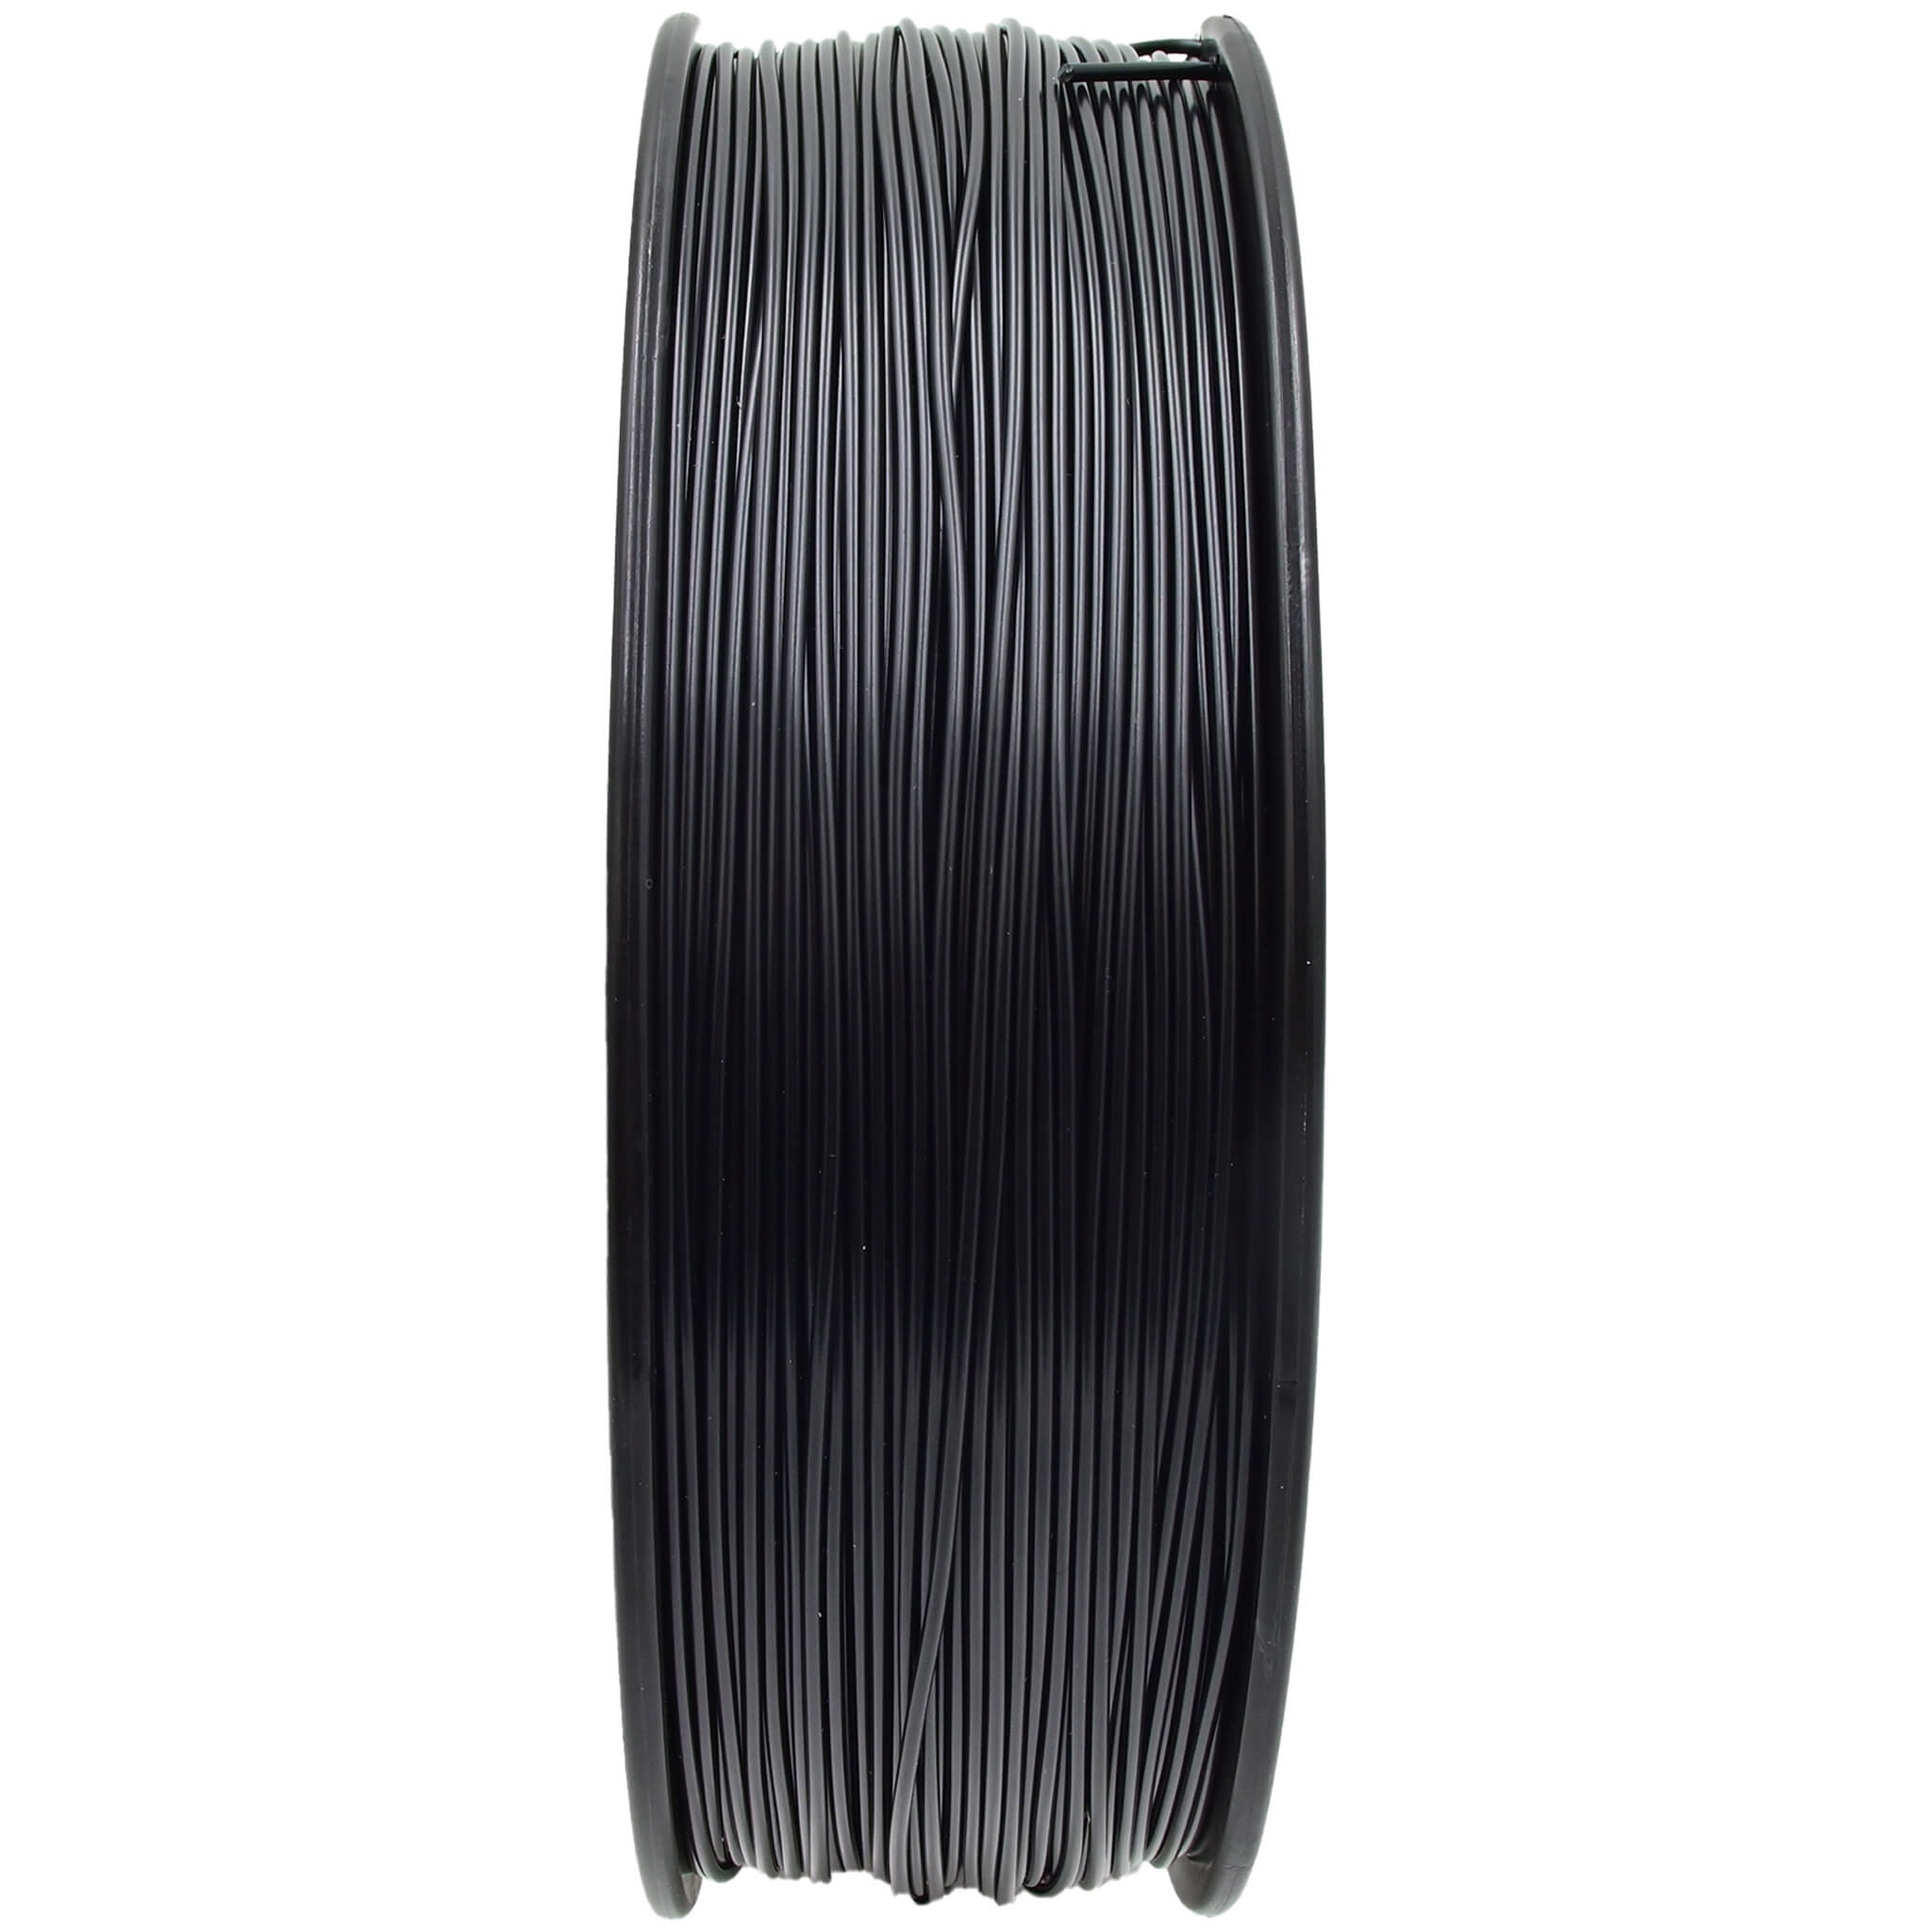 Wanhao ABS FIlament, 1Kg, 1.75mm, Black – 3D Printing Store